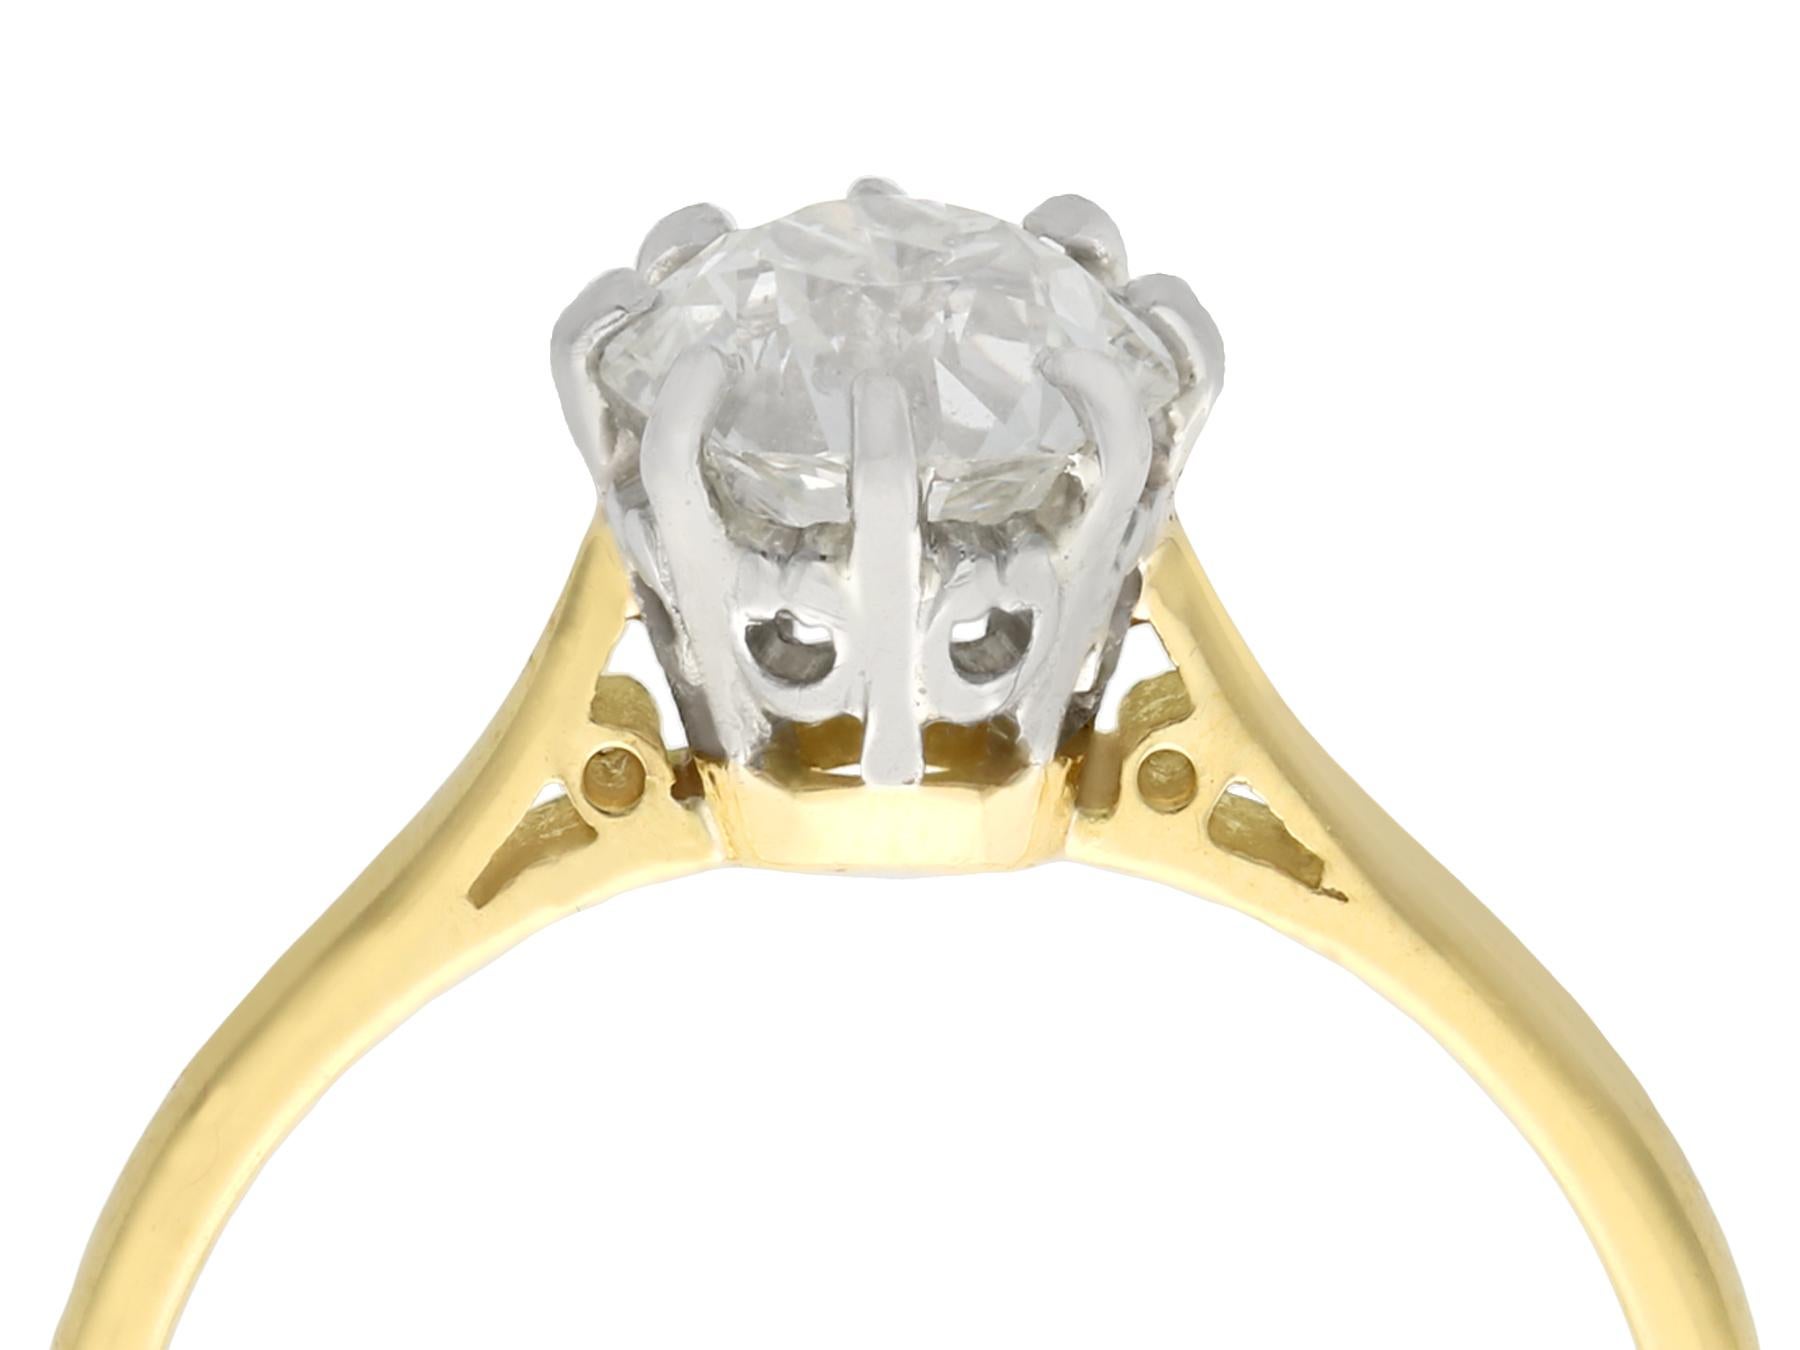 An impressive antique 1.25 carat diamond and 18 carat yellow gold, platinum set solitaire engagement ring; part of our diverse antique jewelry collections.

This fine and impressive eight claw engagement ring has been crafted in 18 Carat gold with a